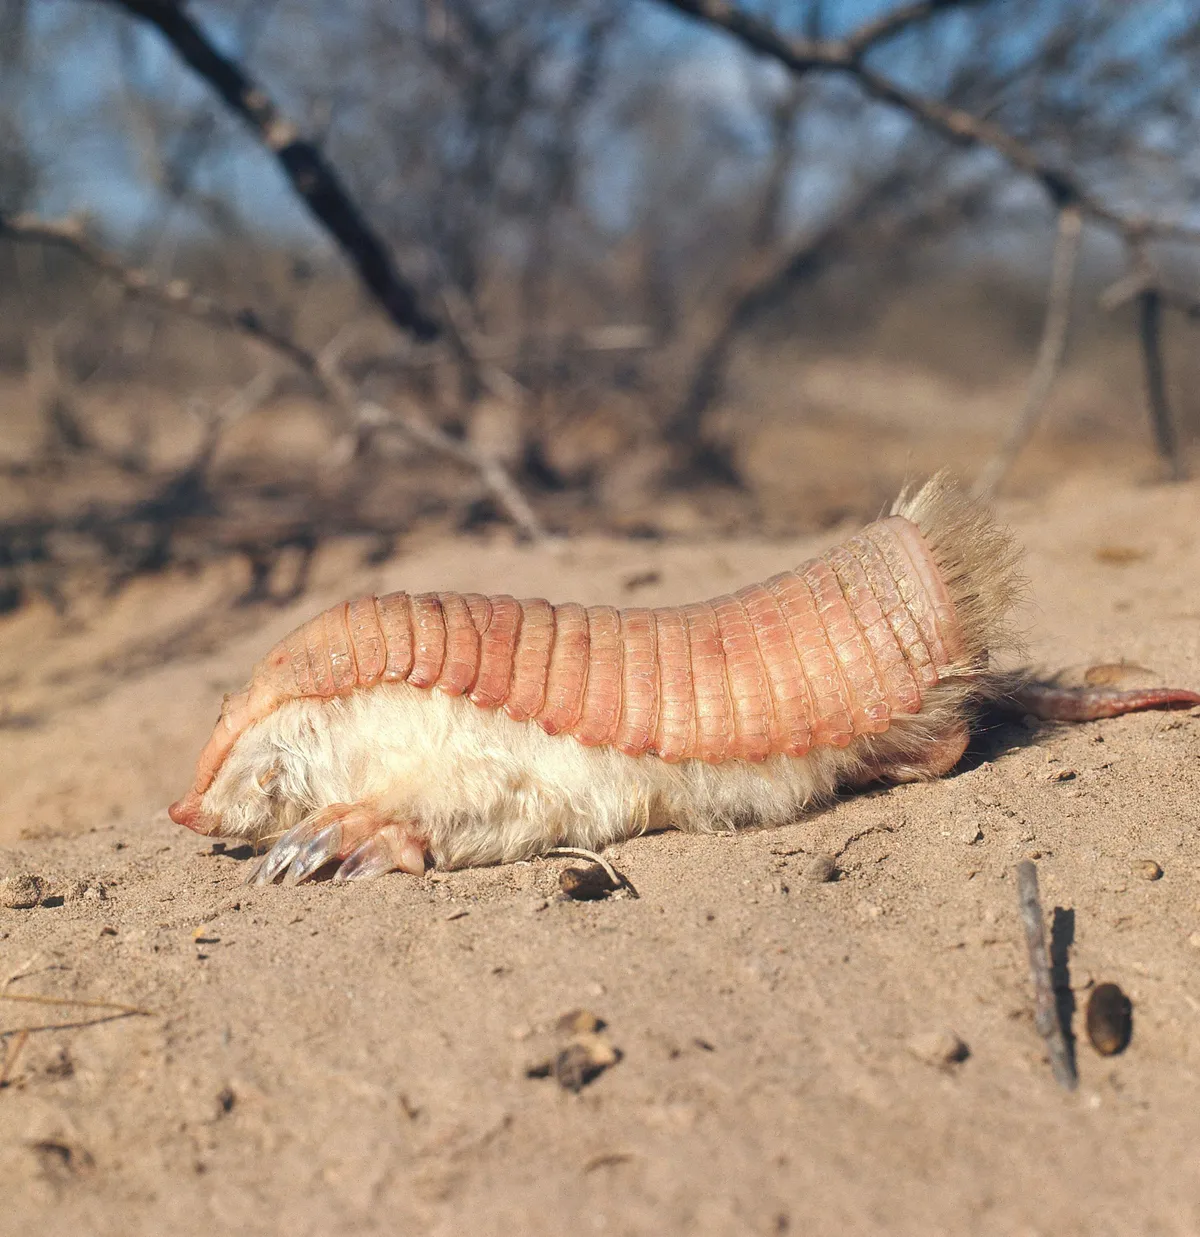 Photograph of a pink fairy armadillo in a sandy environment